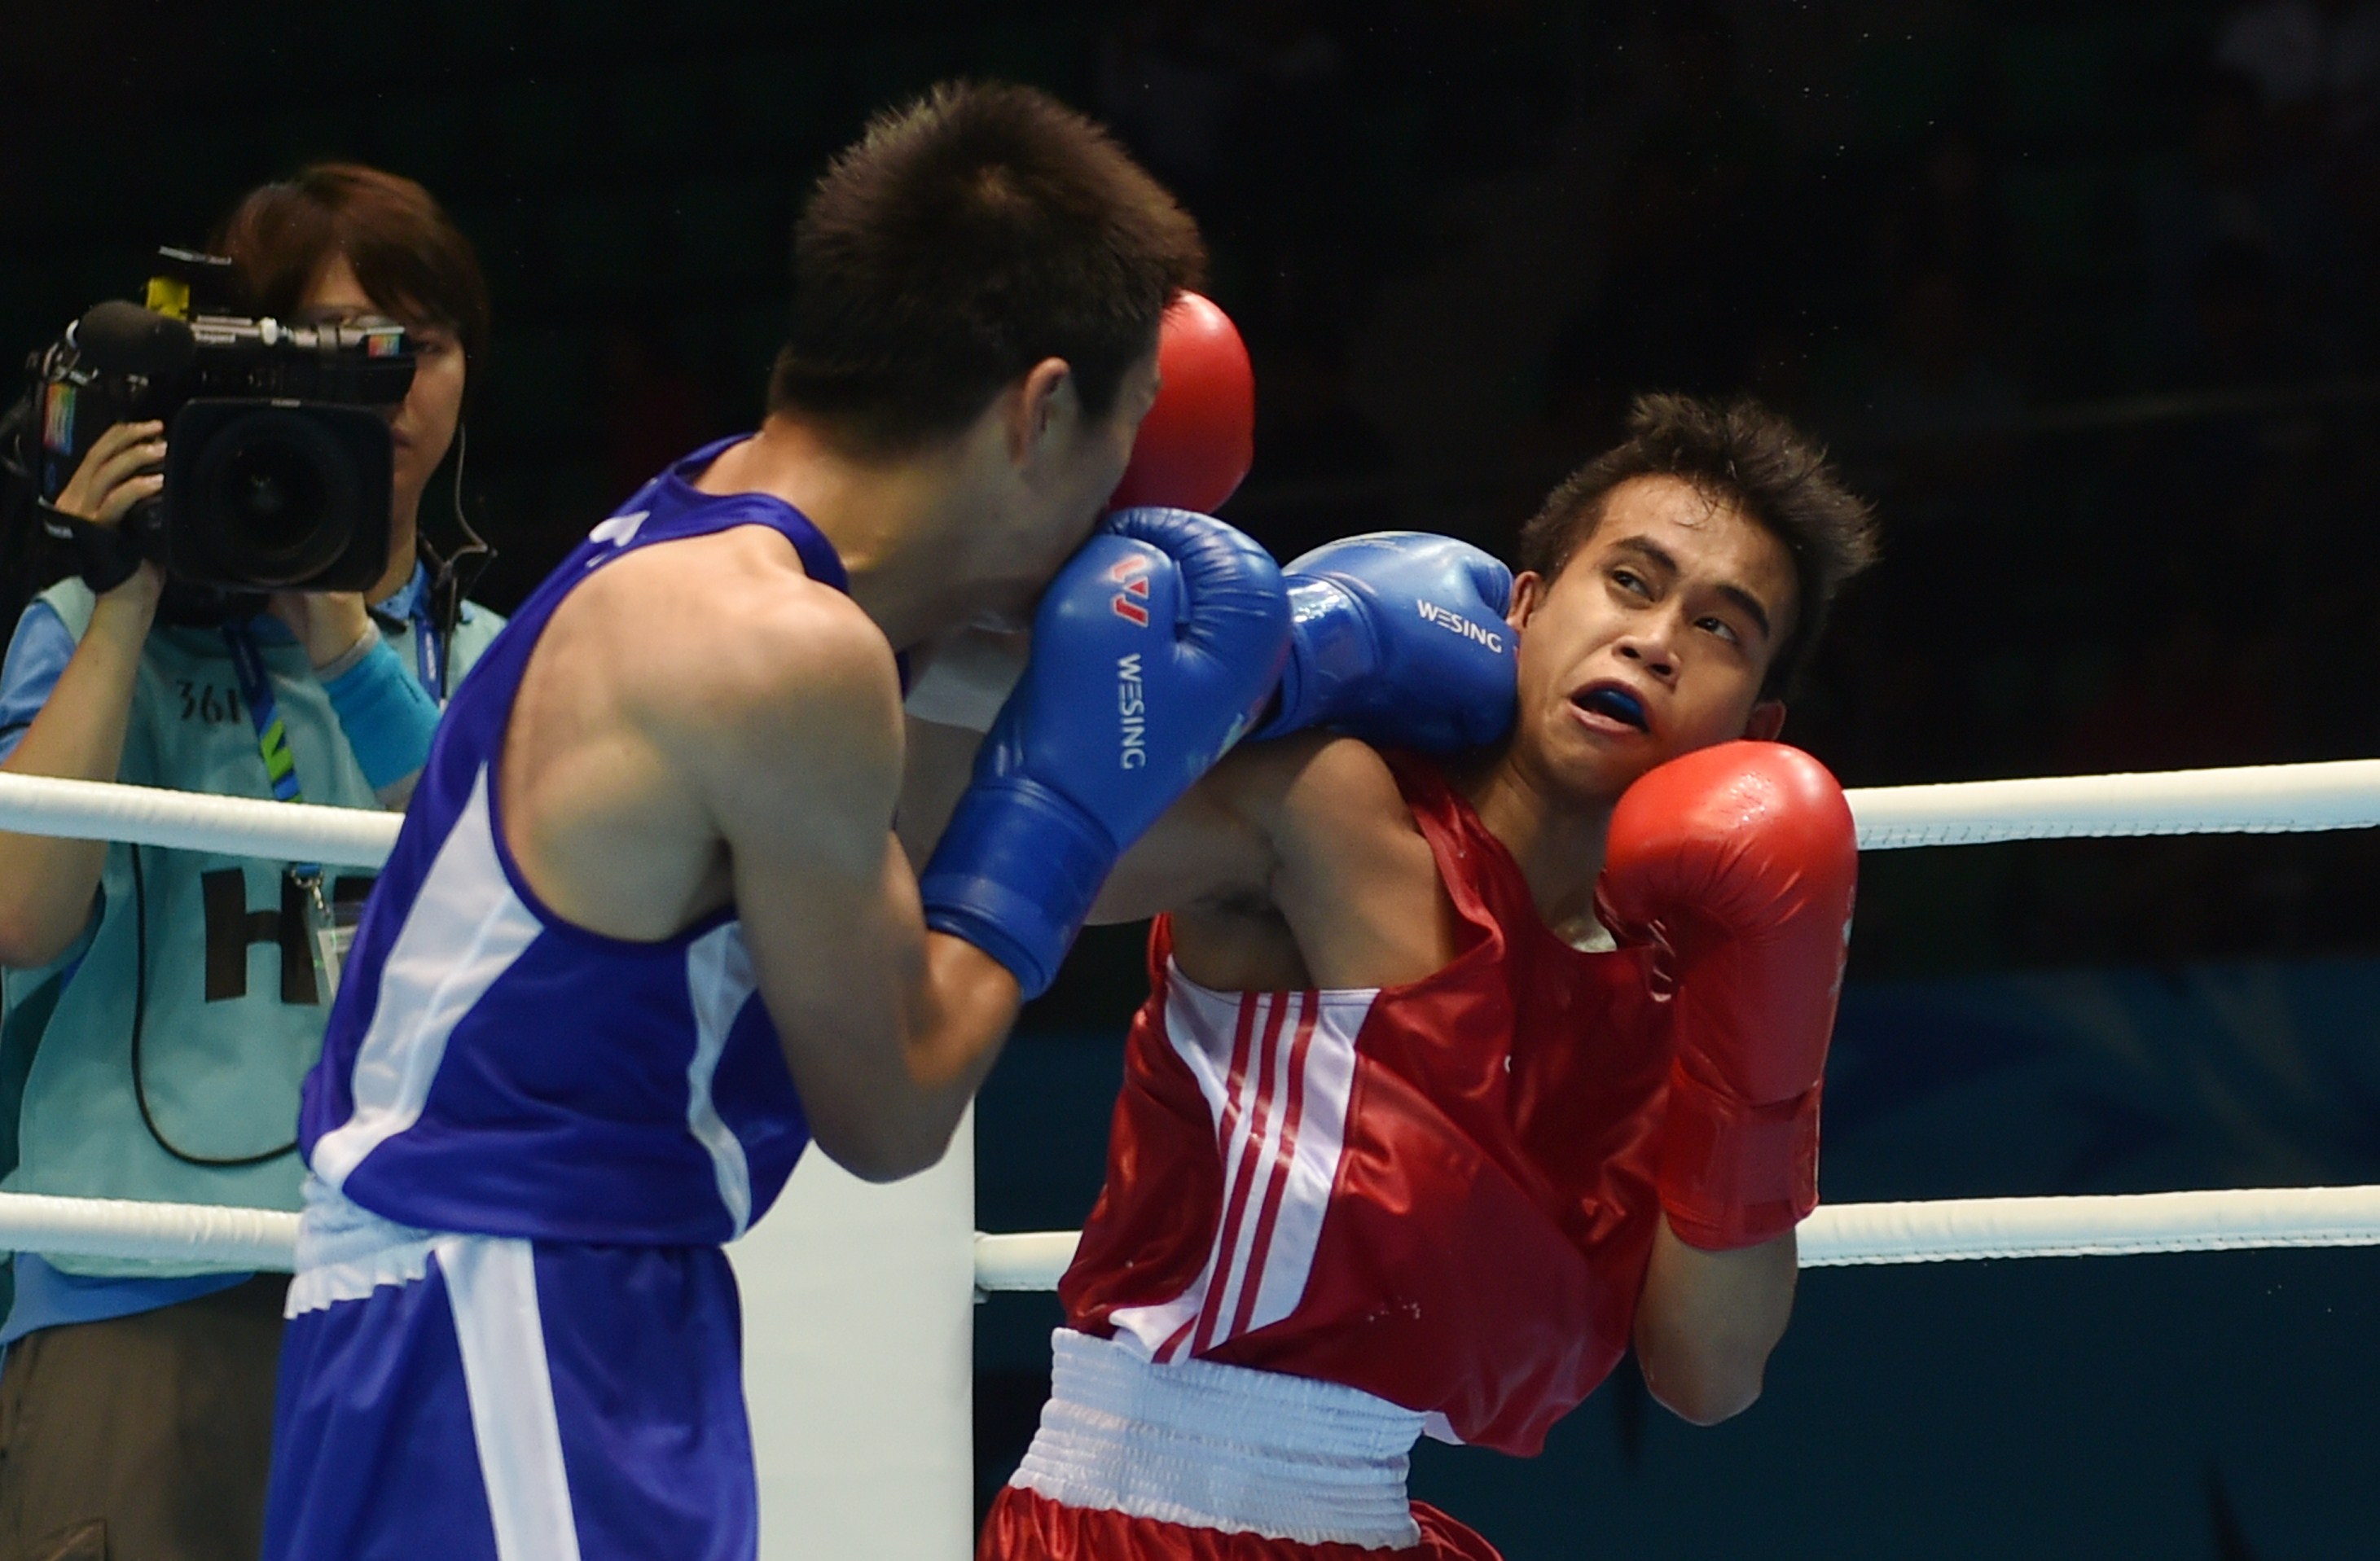 Mark Anthony Barriga (R) of the Philippines competes against Tosho Kashiwasaki (L) of Japan during the boxing preliminaries session 10 at the 17th Asian Games in Incheon on September 28, 2014.